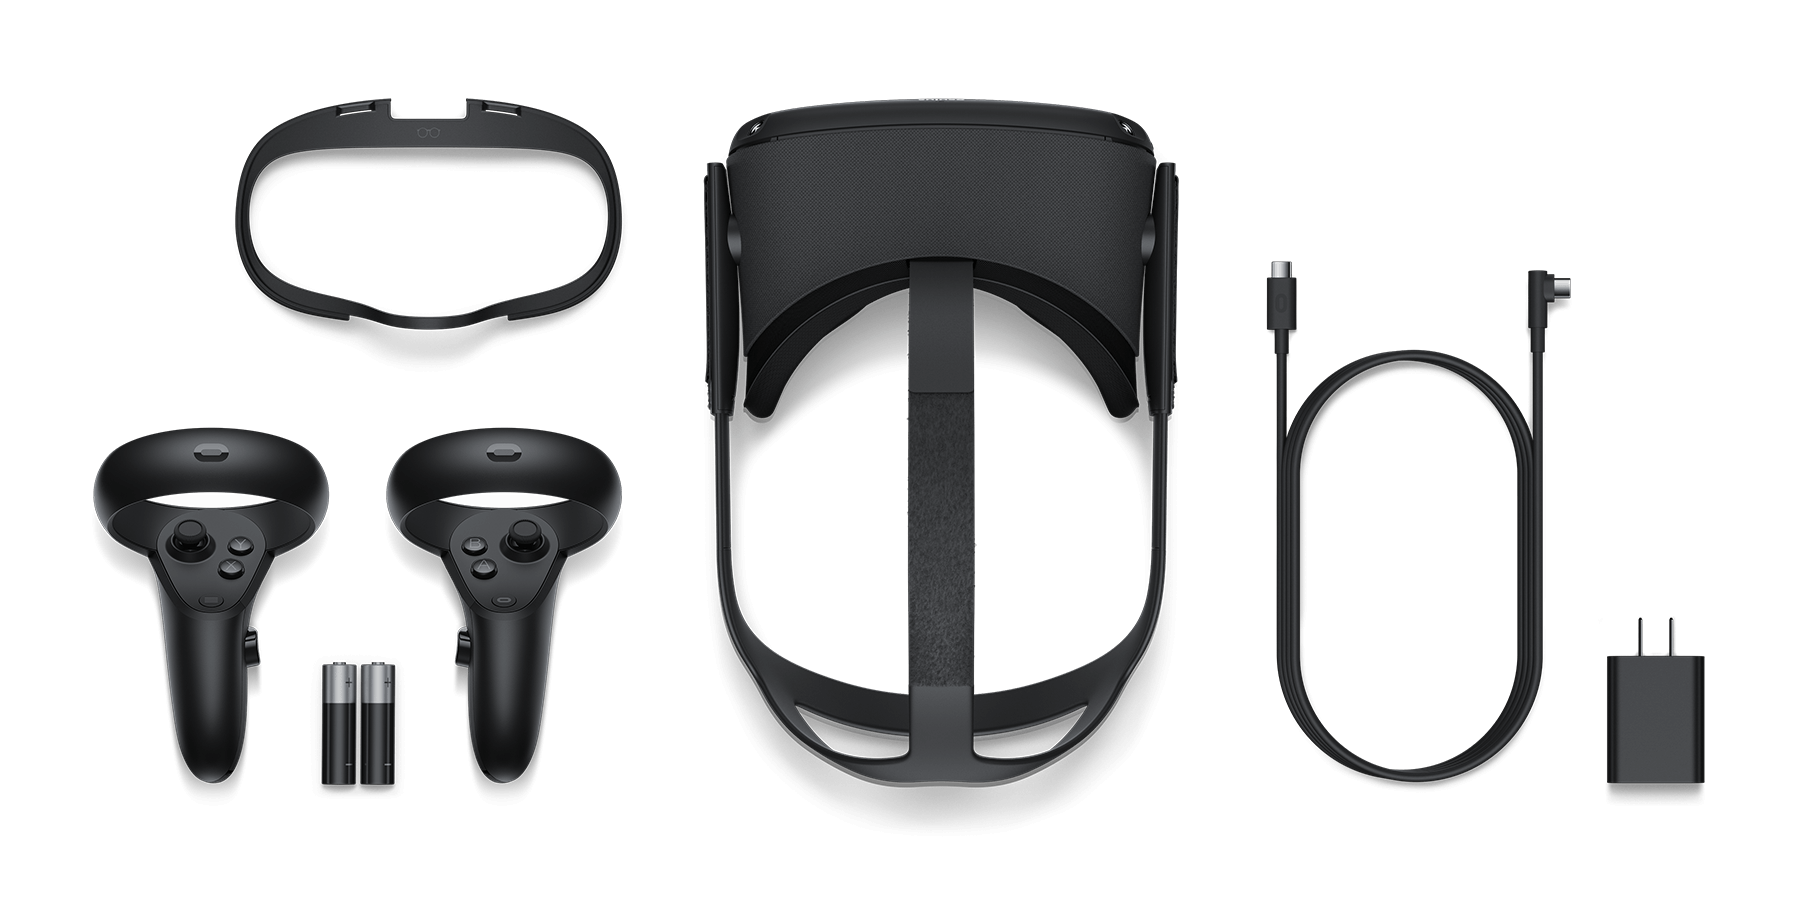 oculus link cable for quest